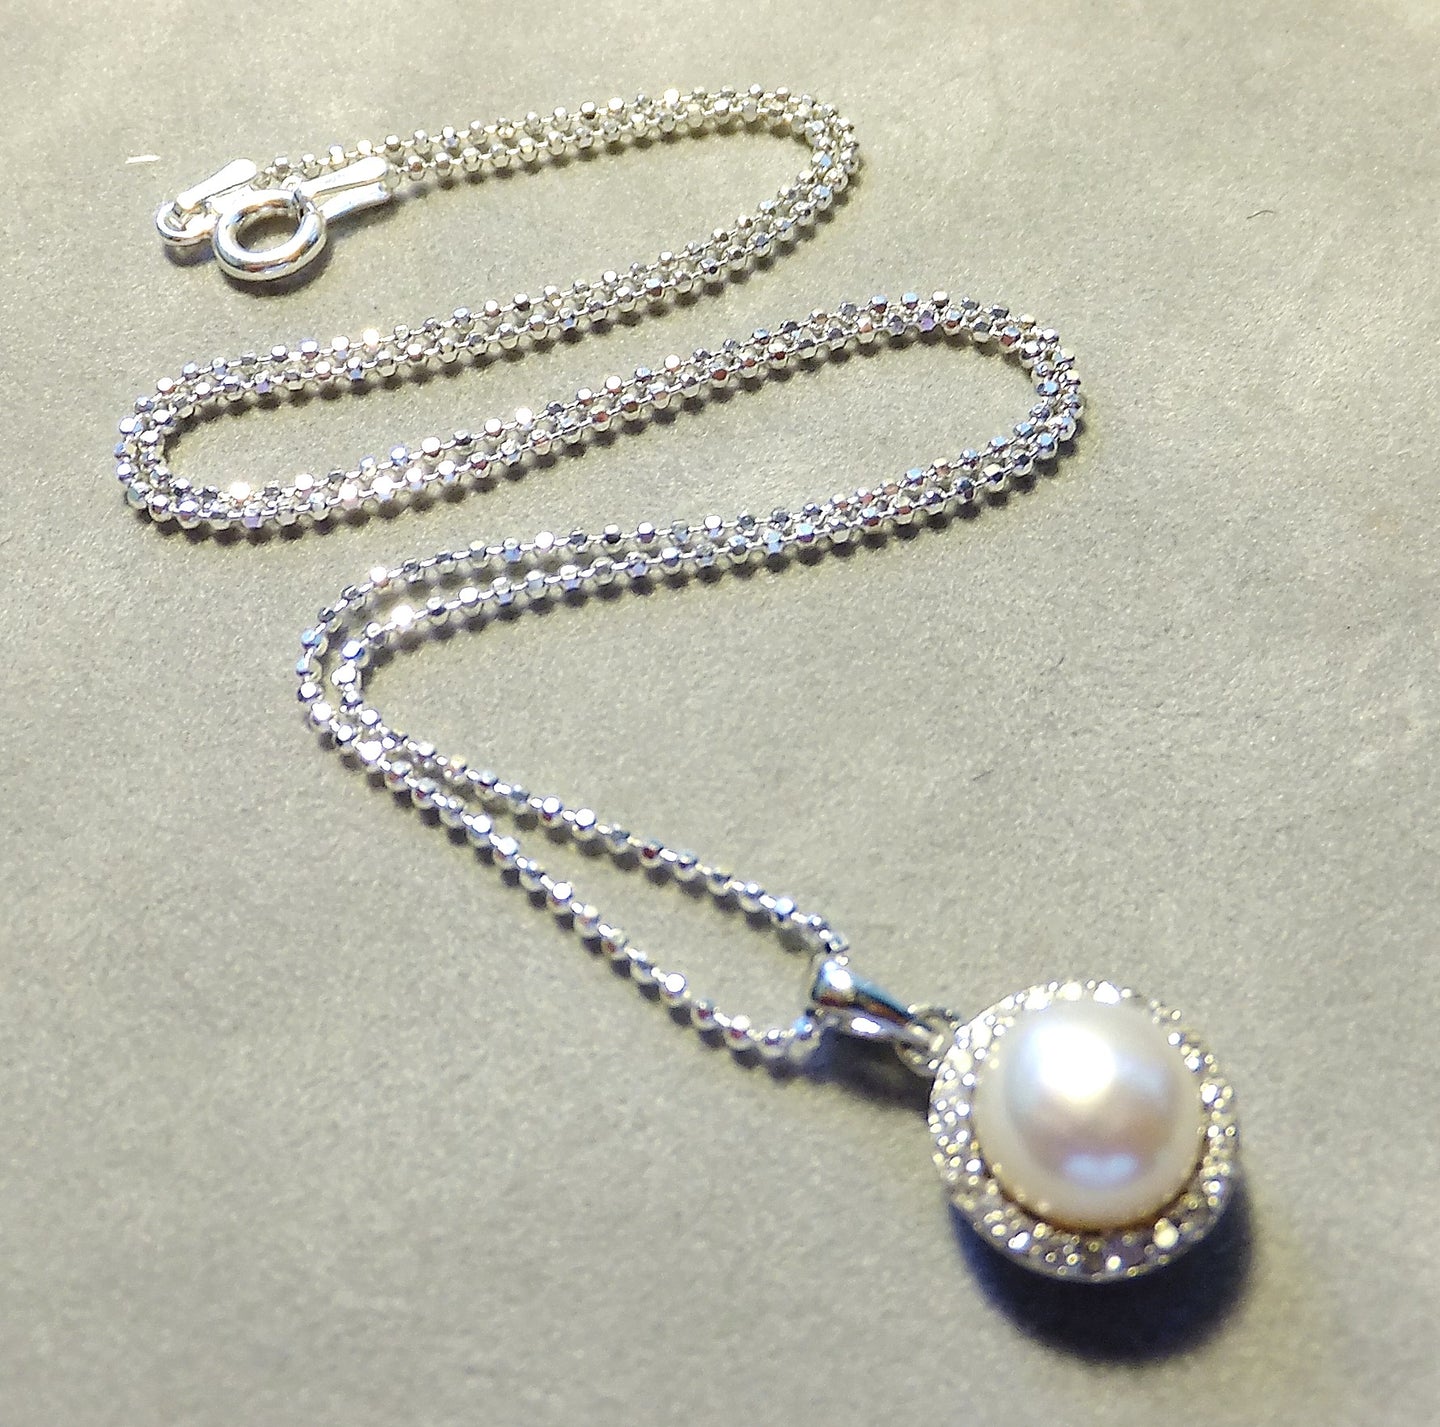 Freshwater white pearl necklace